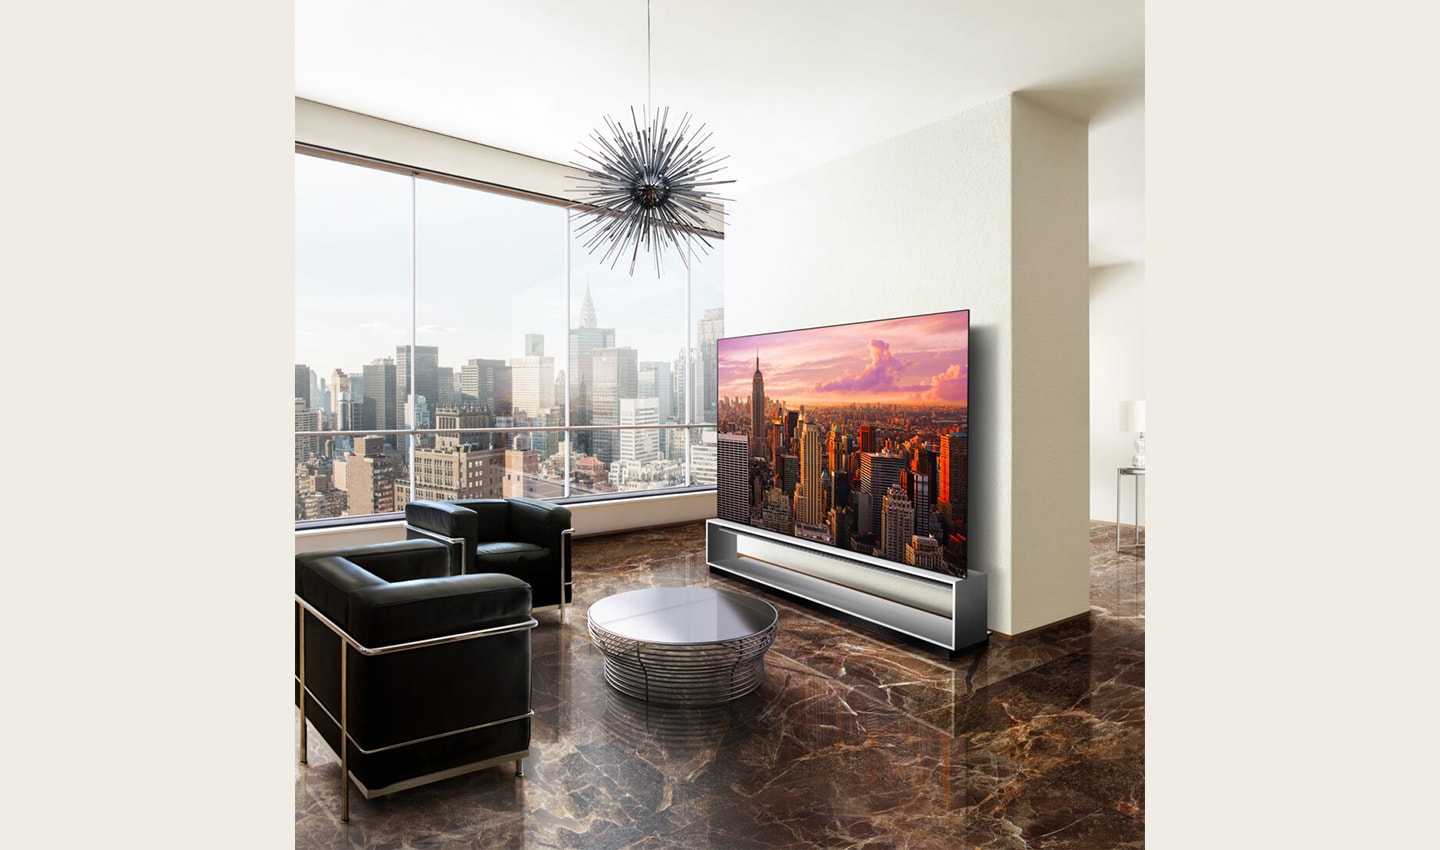 Earth meets metal in this luxurious living space, fusing the unique, high-end characteristics of the Marron Emperador marble floor with the cool steel of the OLED TV's Art Furniture Stand. The 8K resolution of the OLED TV blended with the natural elements of the smooth marble floor giving out the perfect juxtaposition to LG SIGNATURE's technology, offering a superior viewing experience.